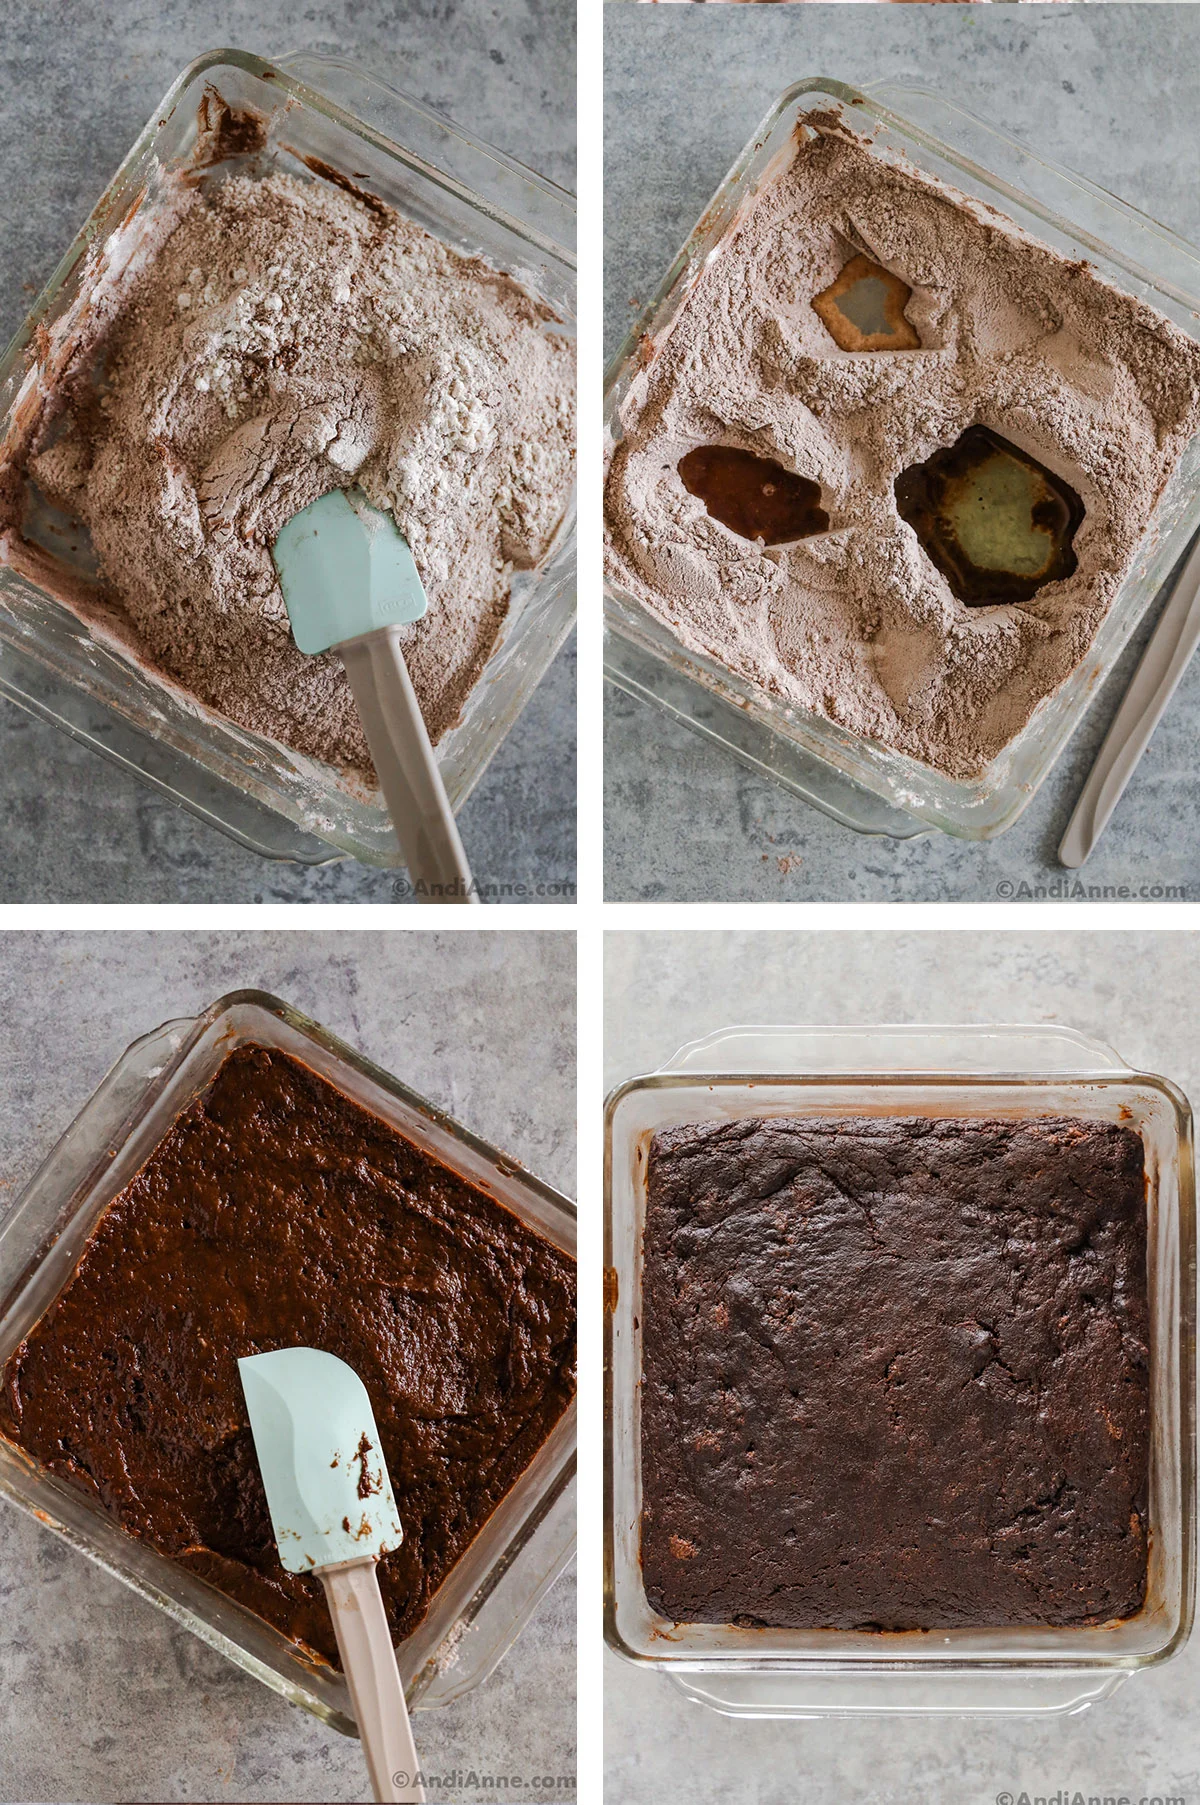 Four images showing steps to make cake, all in a glass baking dish. First is dry ingredients and a spatula. Second is three holes in the dry ingredients with liquid poured into each. Third is wet chocolate cake batter. Fourth is baked chocolate cake.